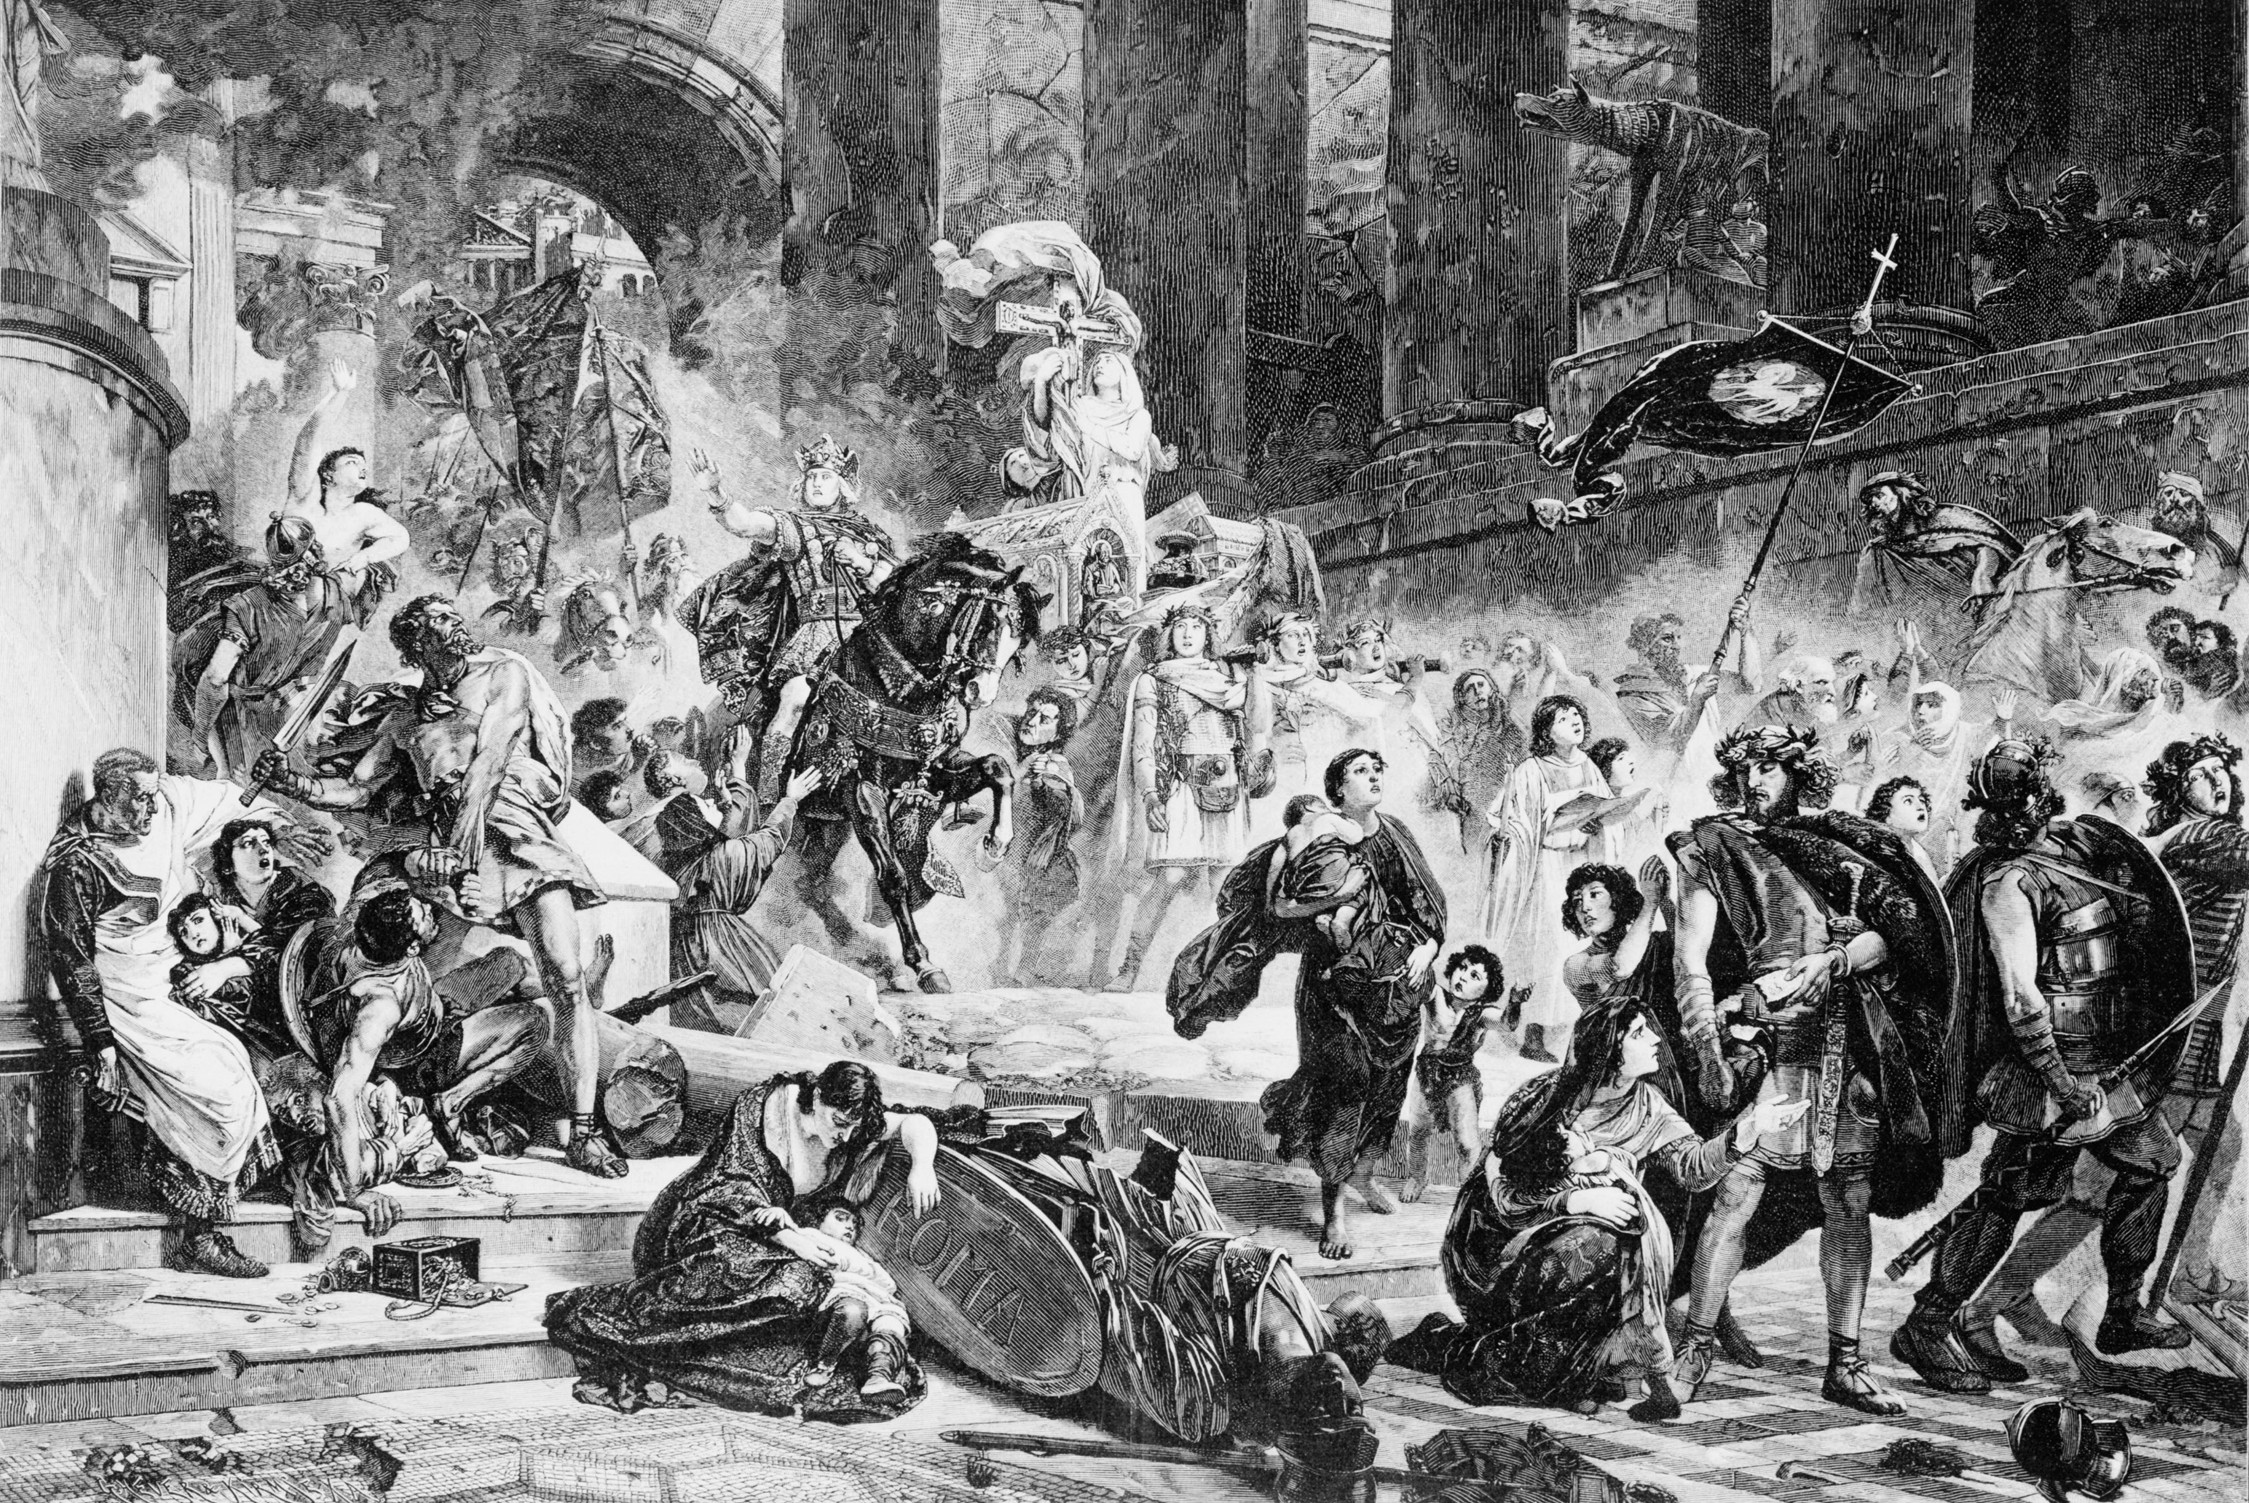 Alaric’s Goth army storms the streets of Rome during a brutal sacking of the city that would last for three days. The worst offenders would be the mercenary Huns.